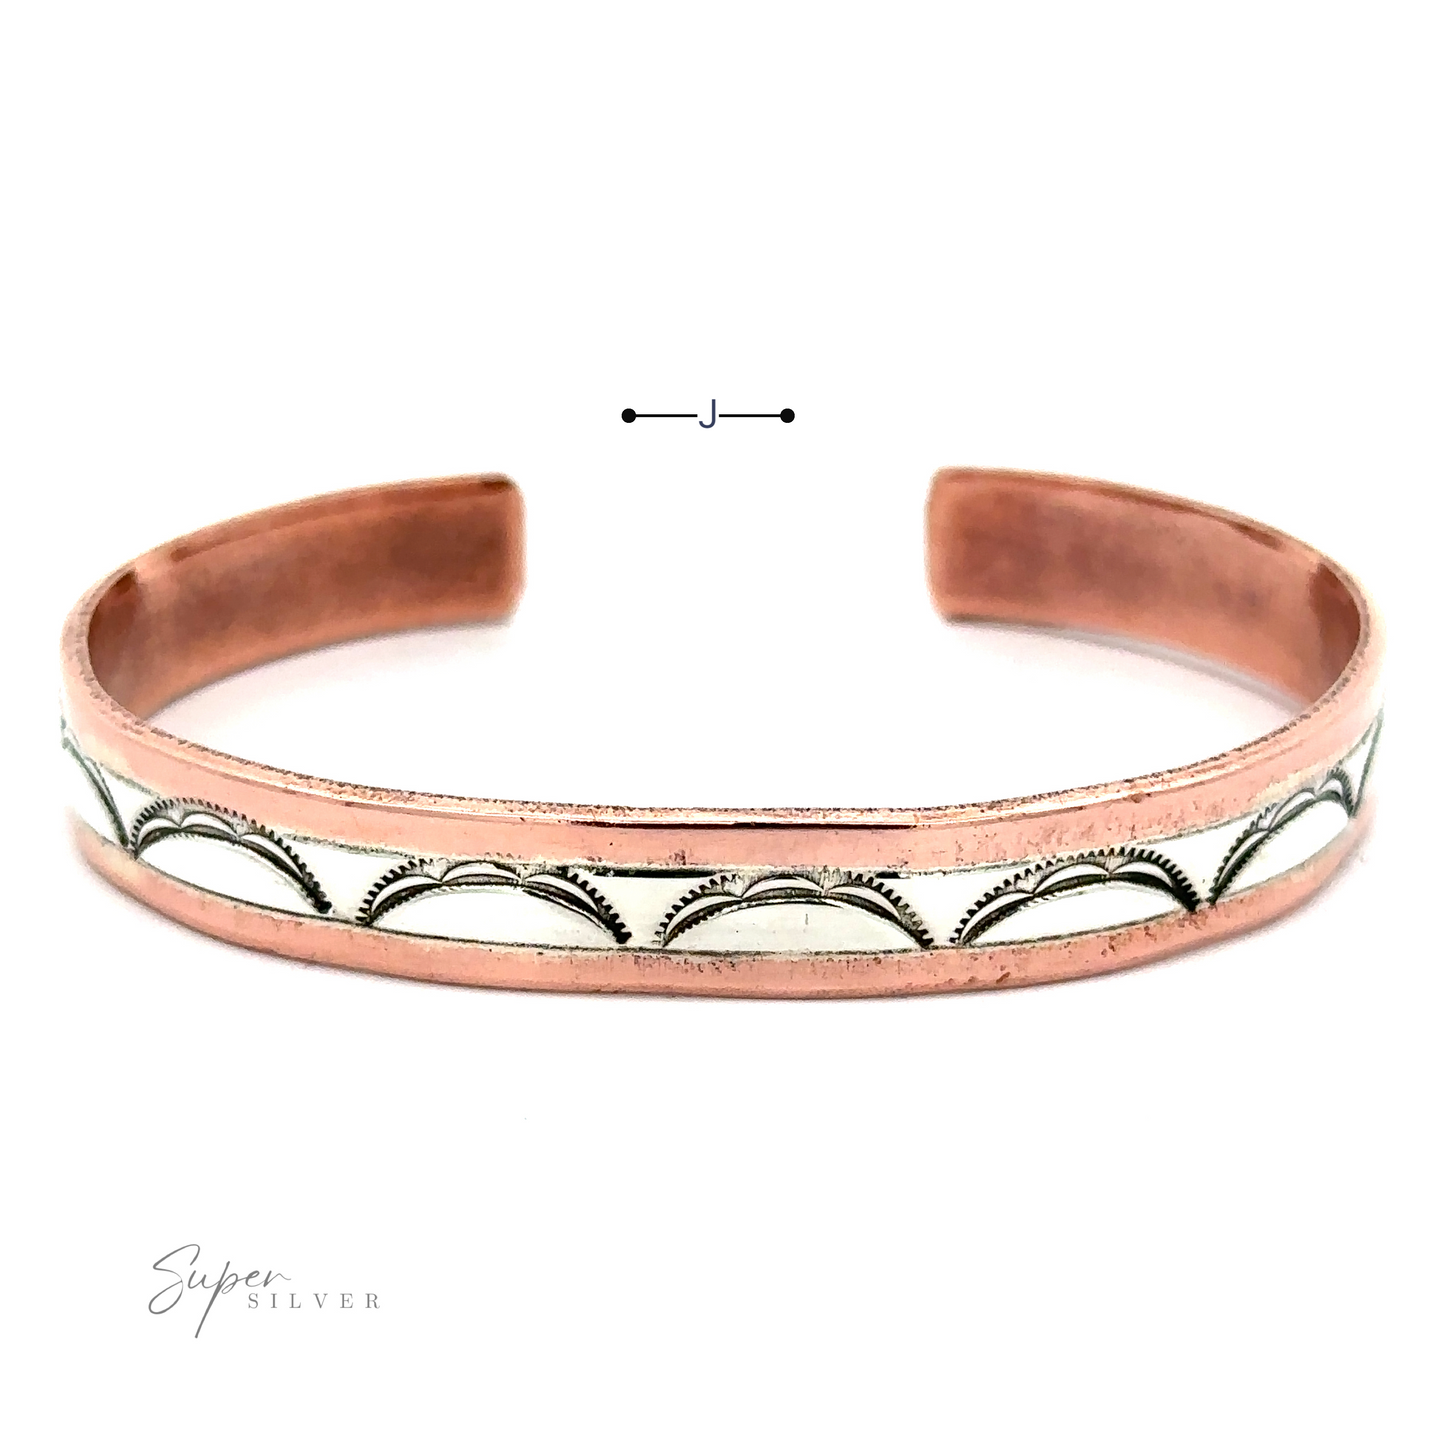 
                  
                    Native American Handmade Copper And Silver Bracelet with sterling silver inlays featuring a repeated curved pattern. Branding text "Super Silver" is visible on the lower left.
                  
                